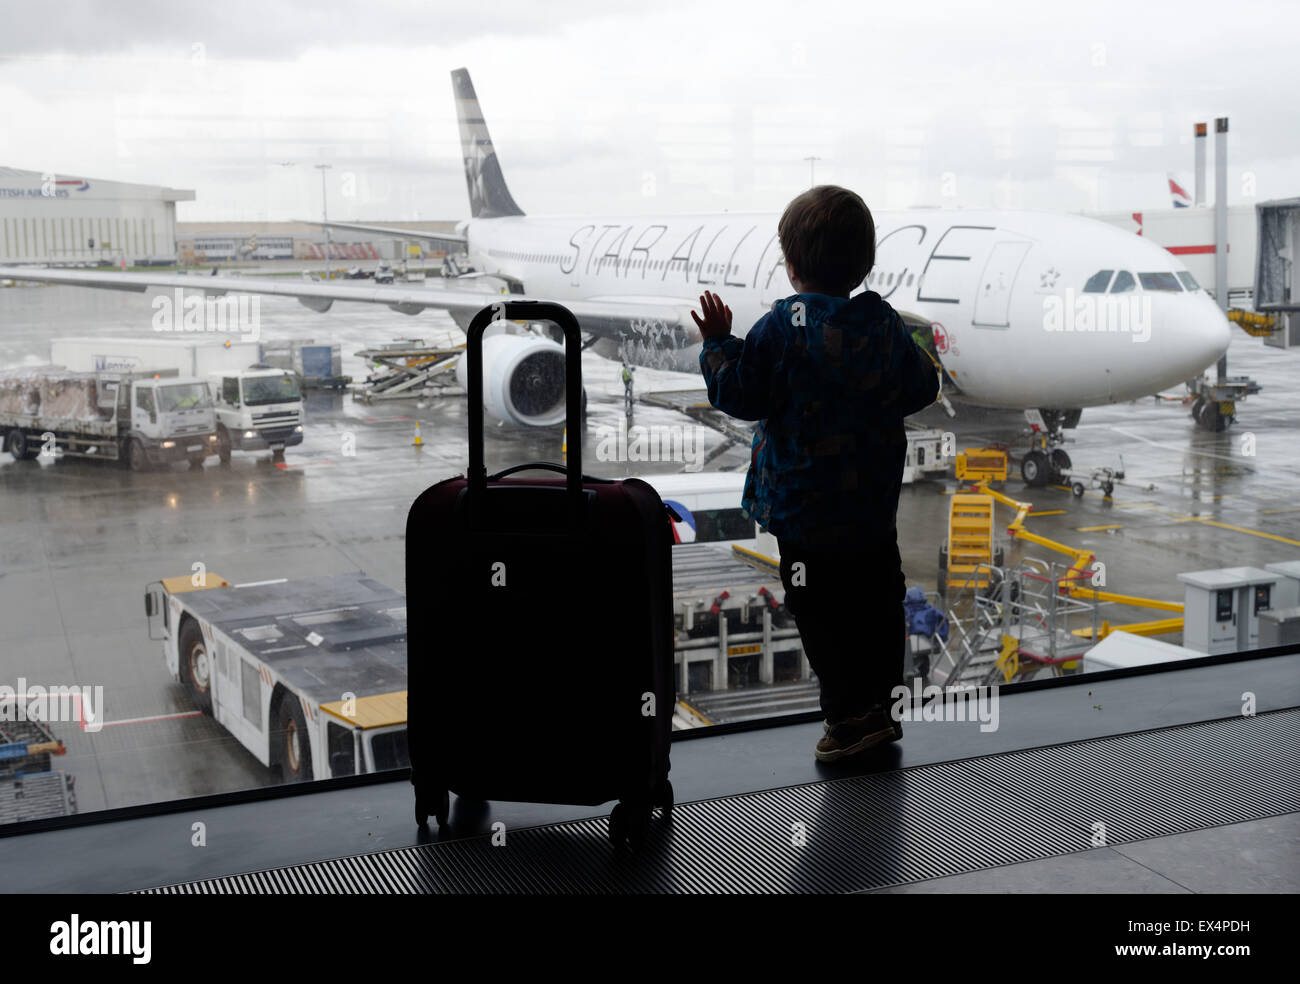 A young boy looking out of an airport window at the planes Stock Photo